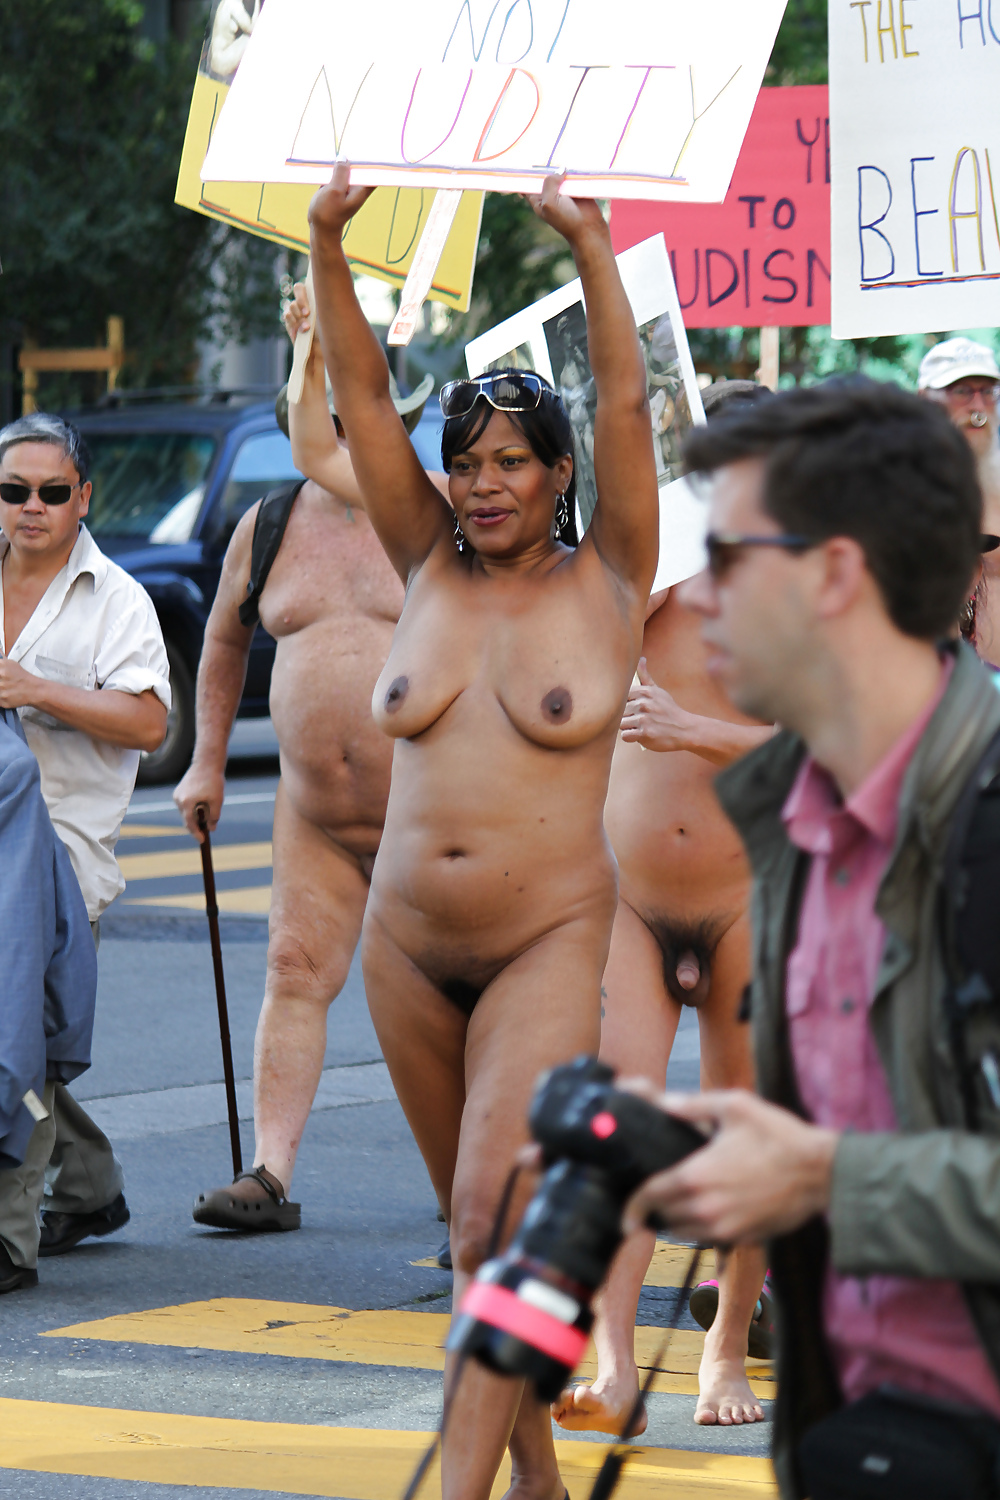 Black Woman Protesting Naked in Public #16626130